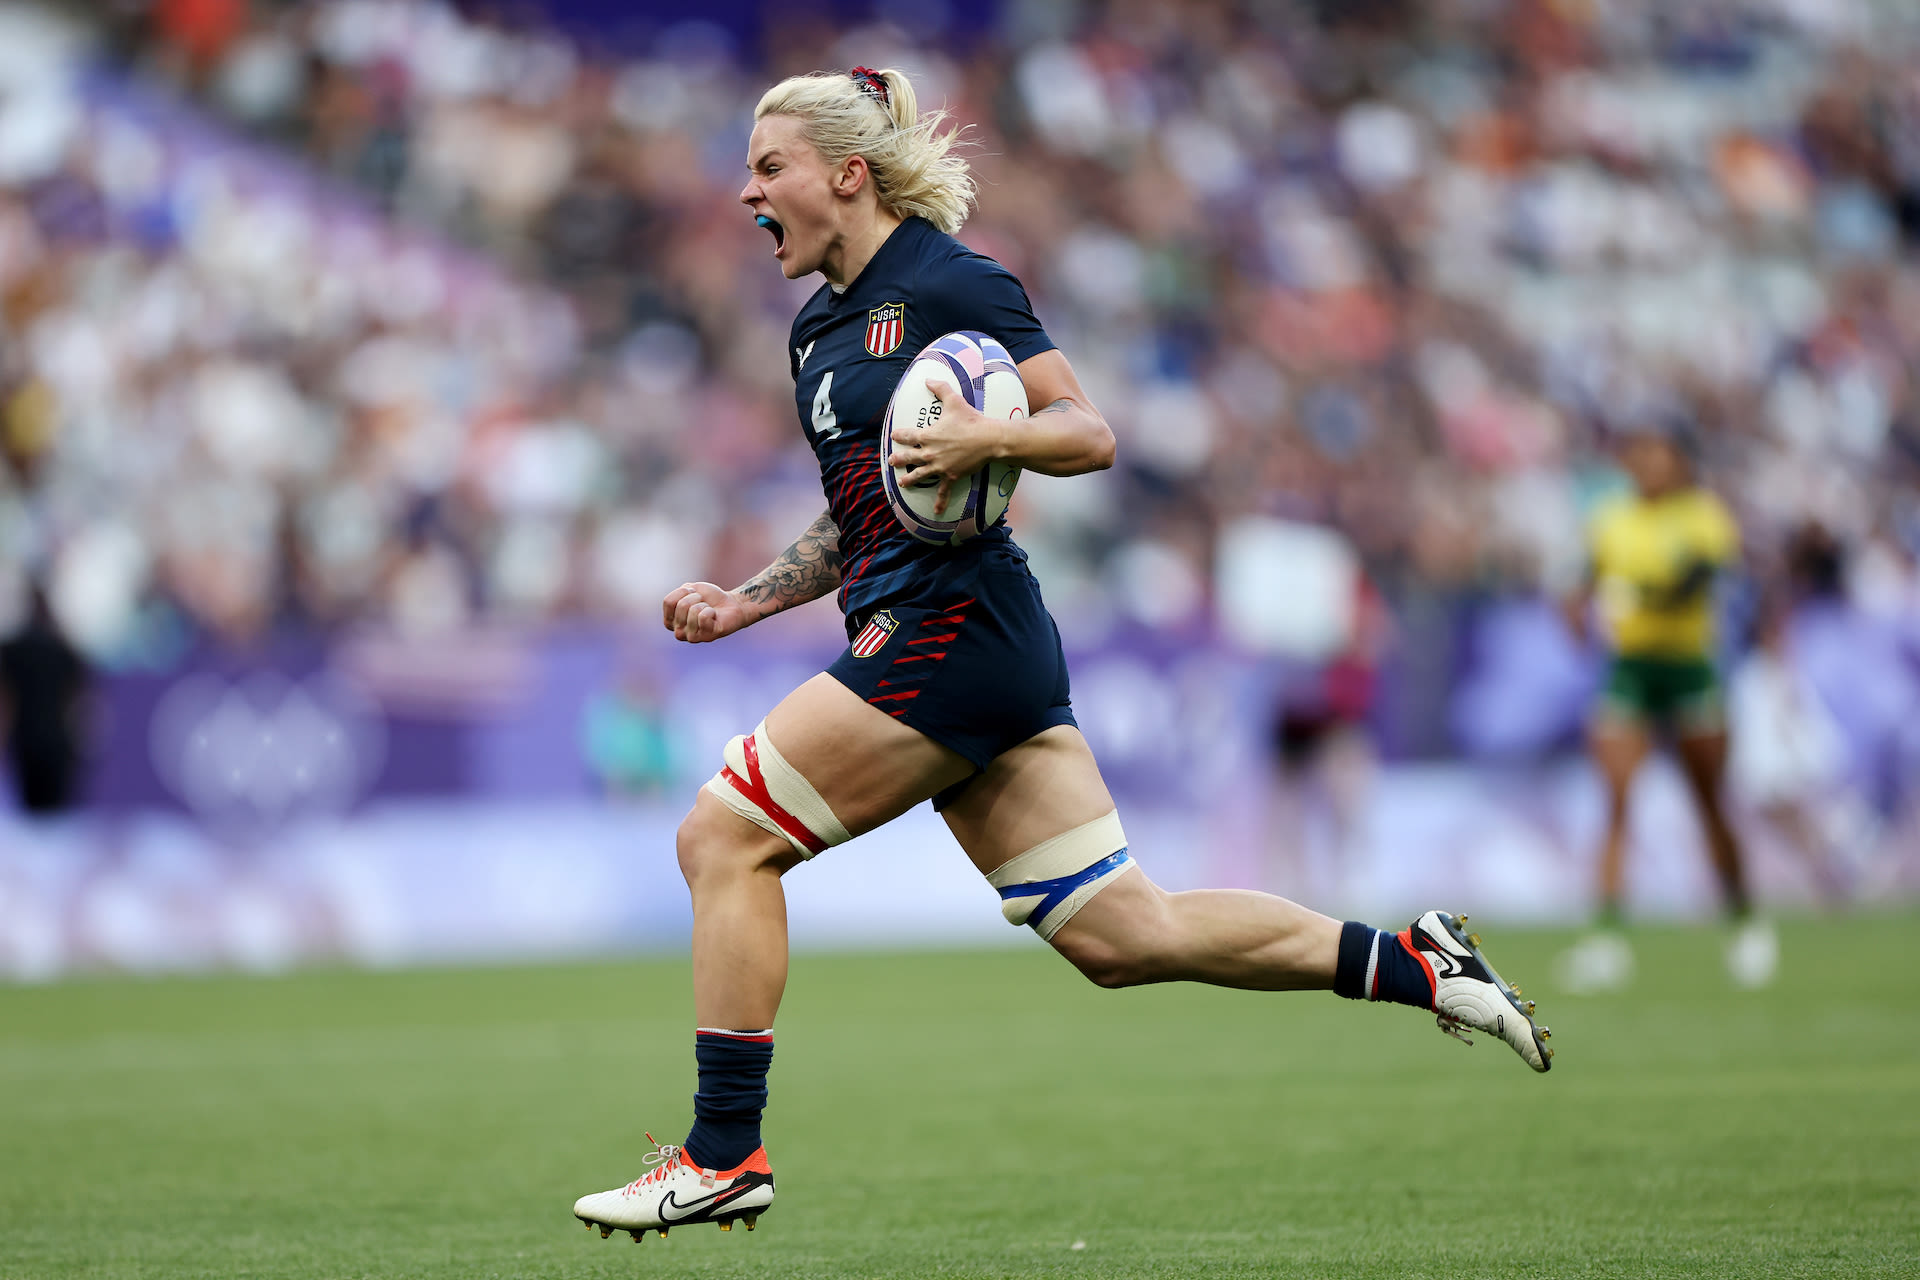 An Army officer is one of the stars of the U.S. women's Olympic rugby team